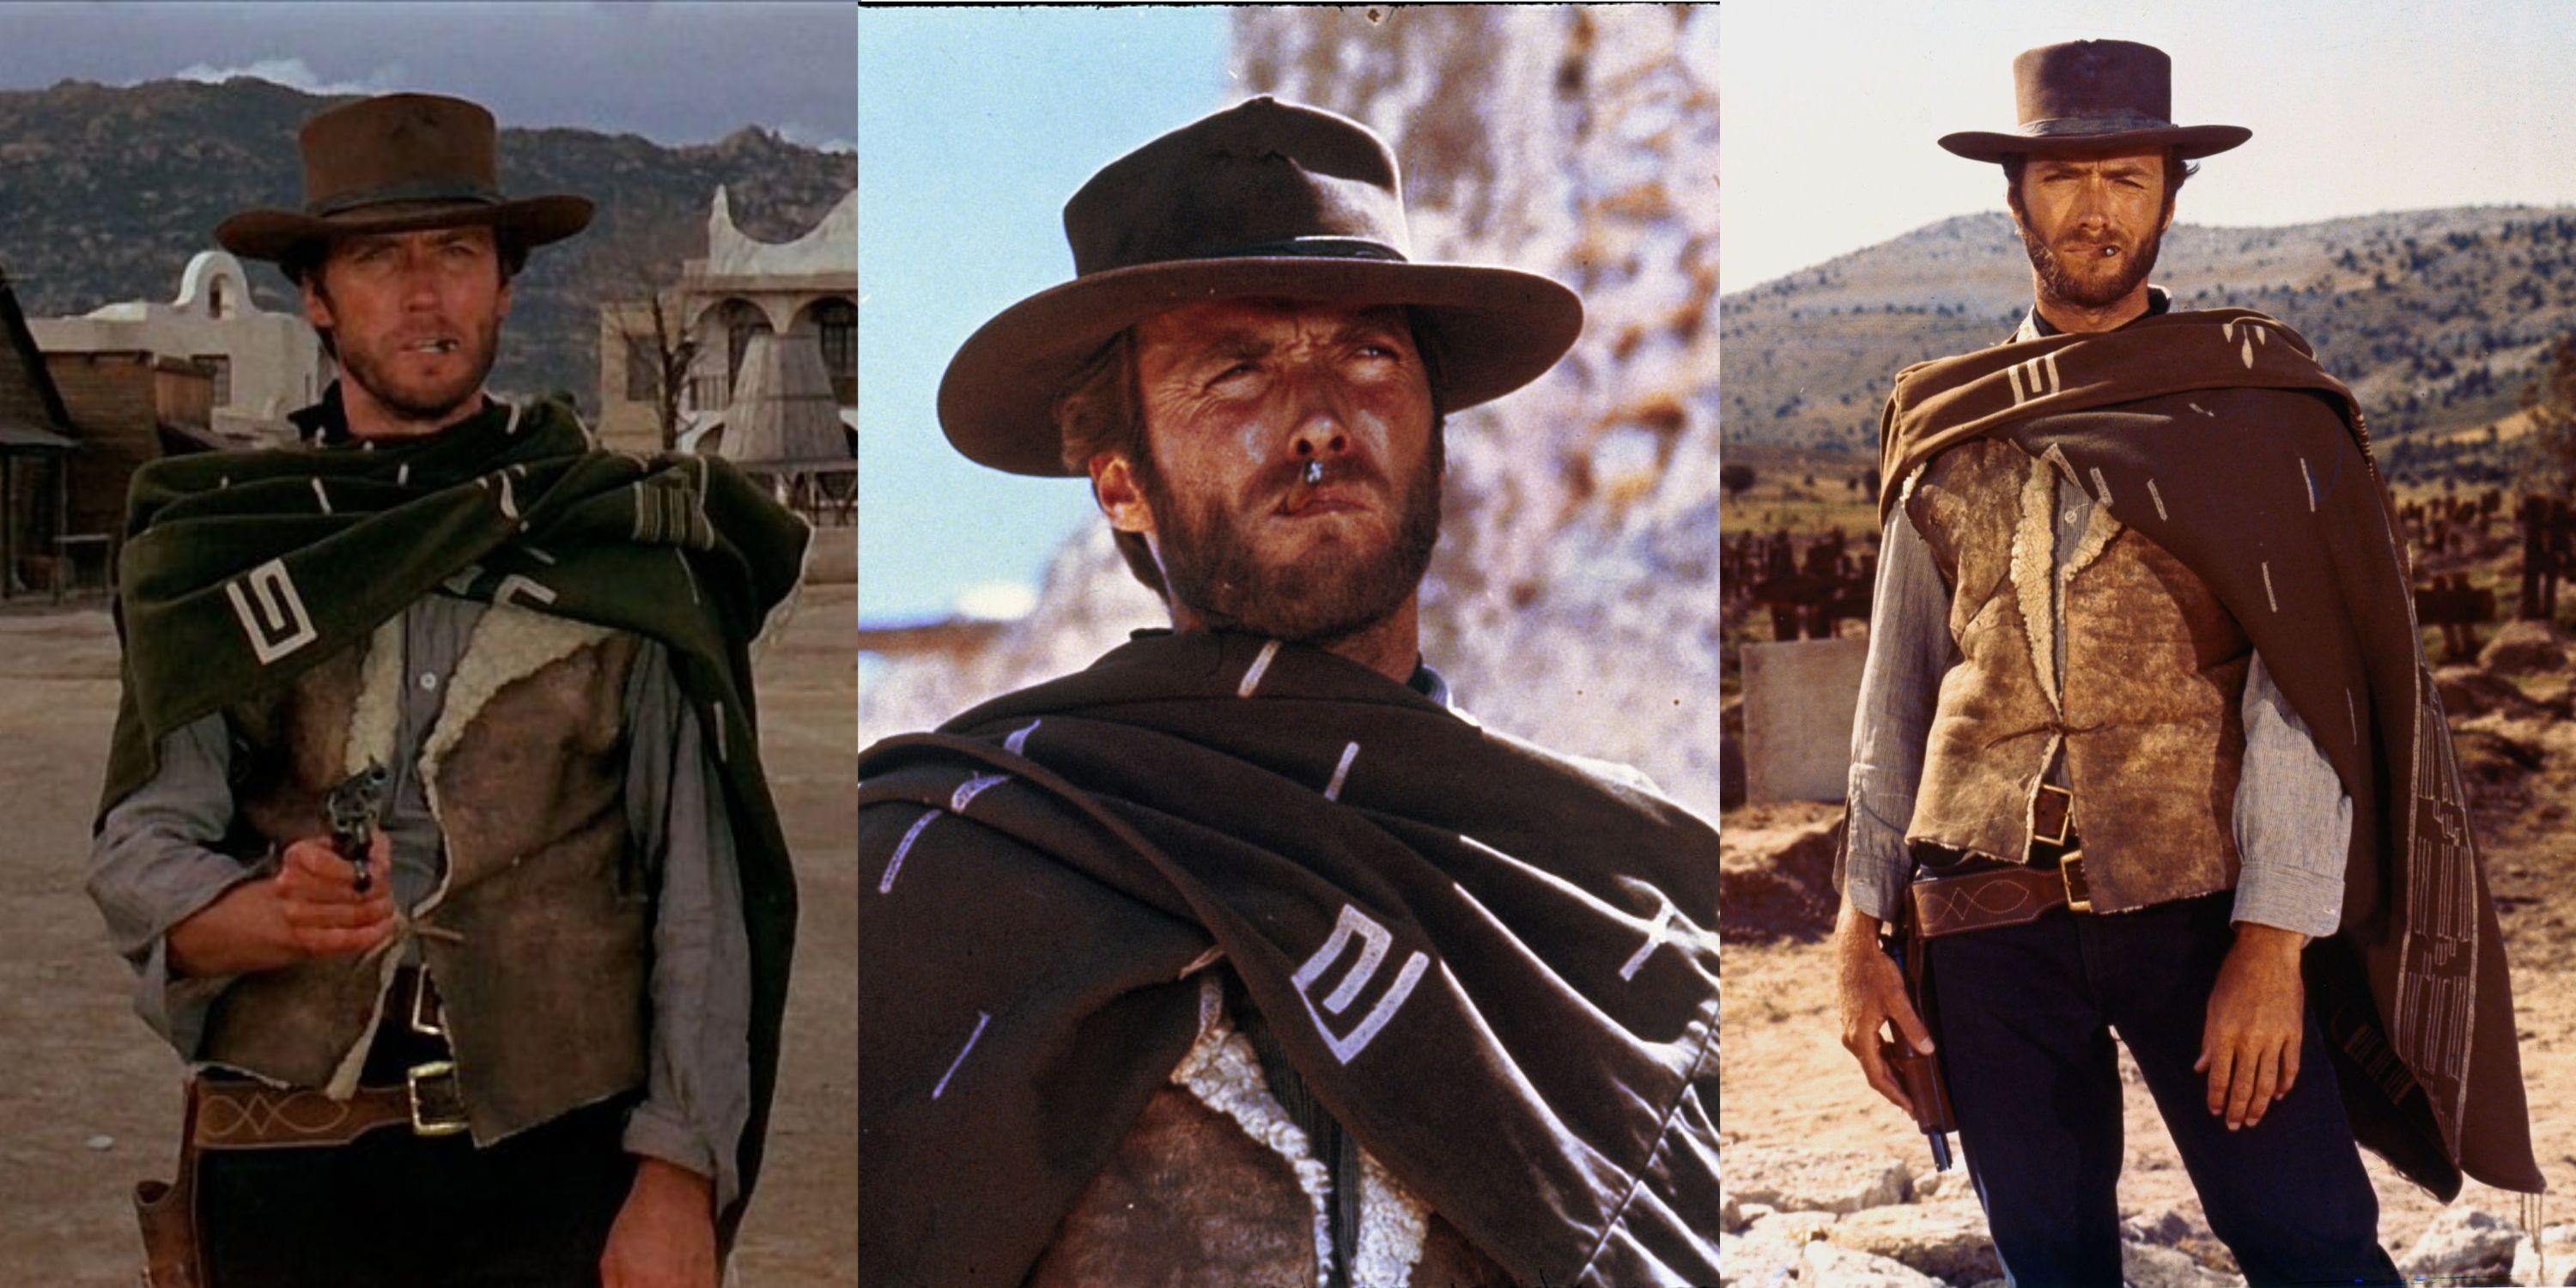 The Dollars Trilogy Collage - Three Images of Clint Eastwood in the Dollars Trilogy movies